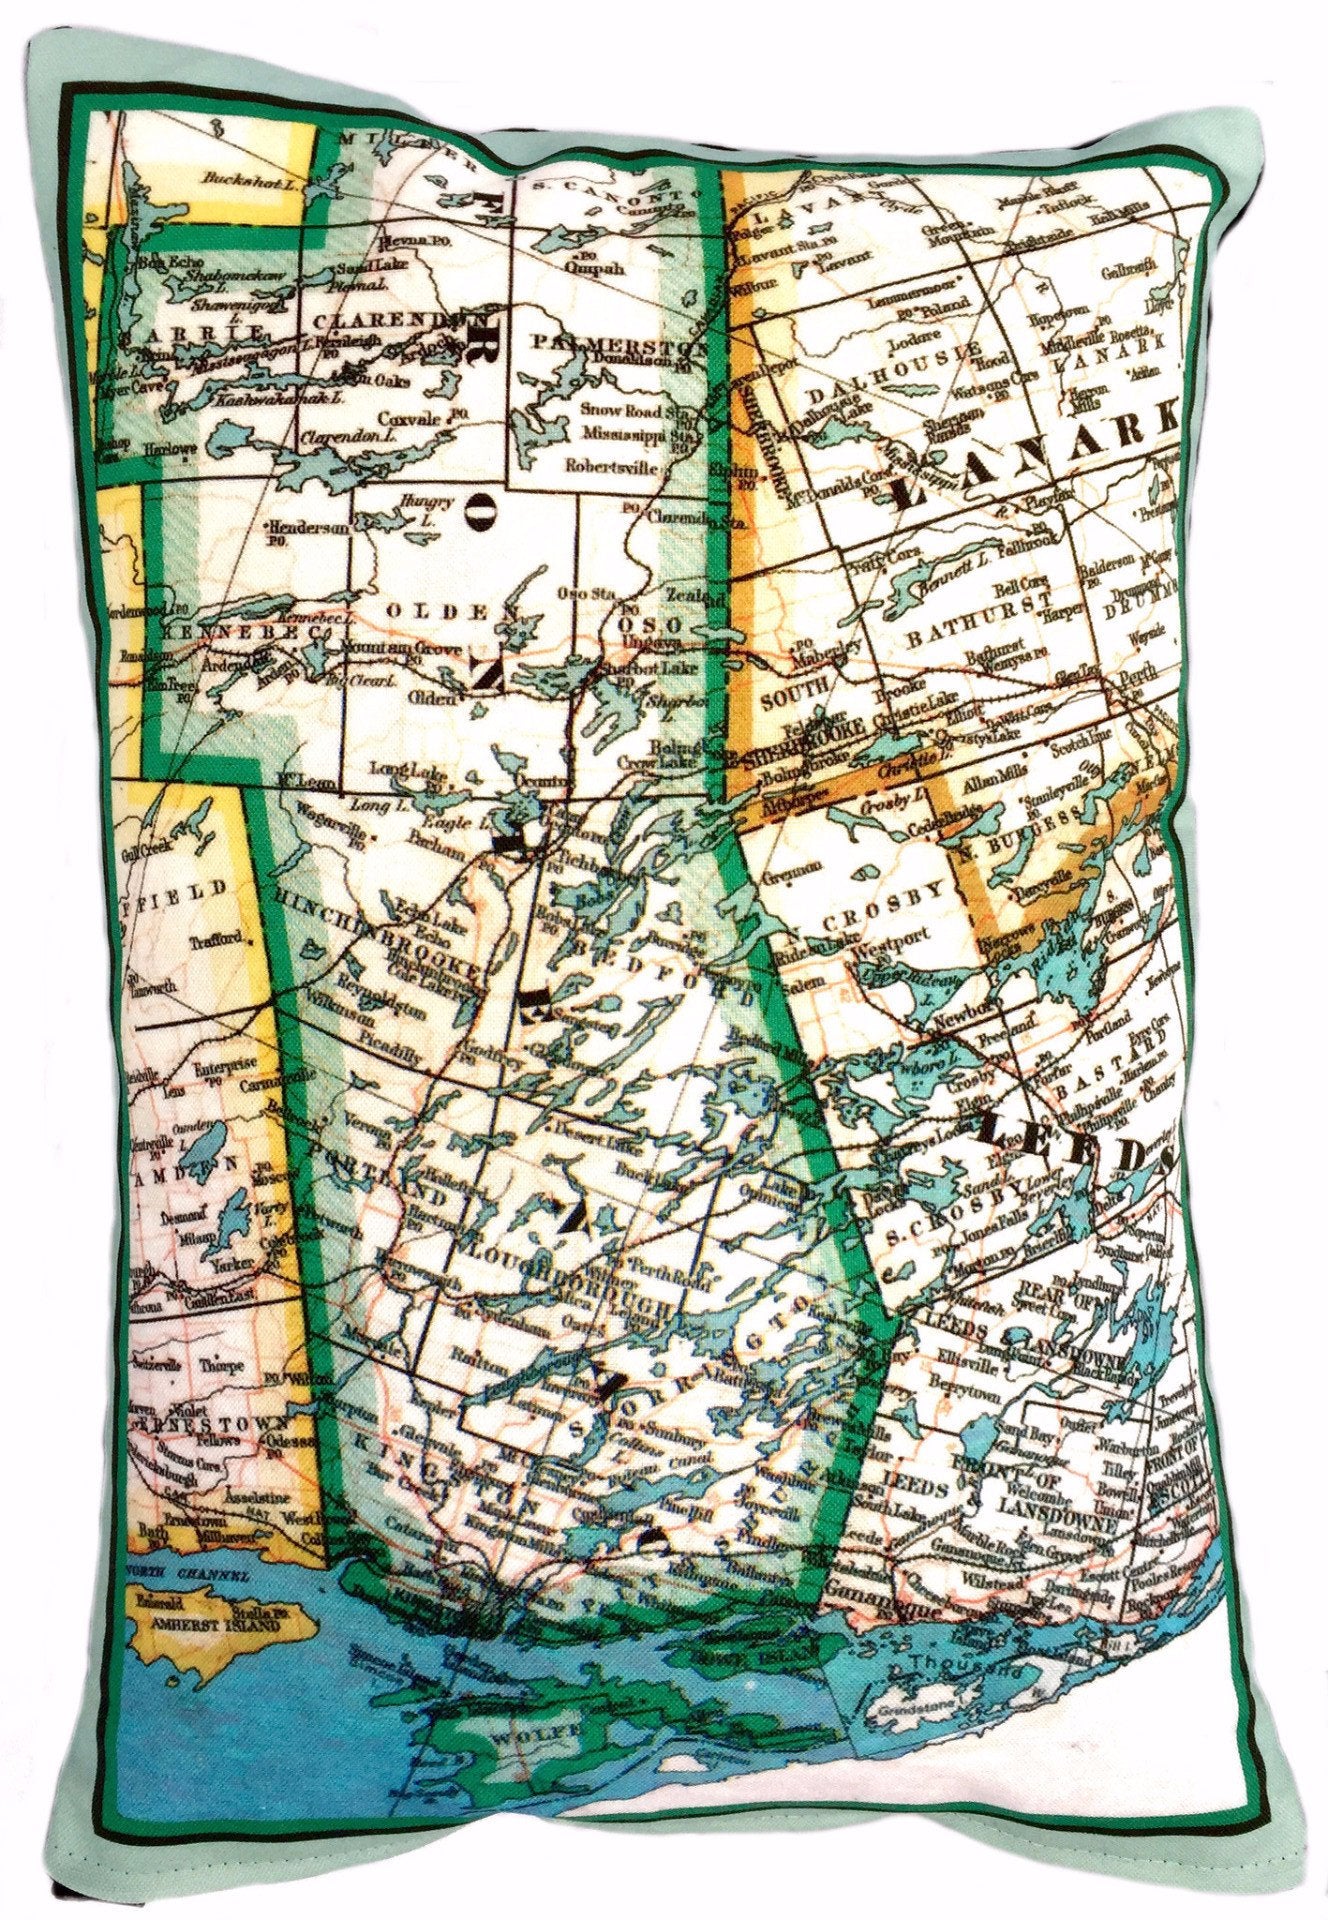 Made in Canada linen pillow case with hand printed vintage map of the Rideau Lakes region in eastern Ontario, Canada.